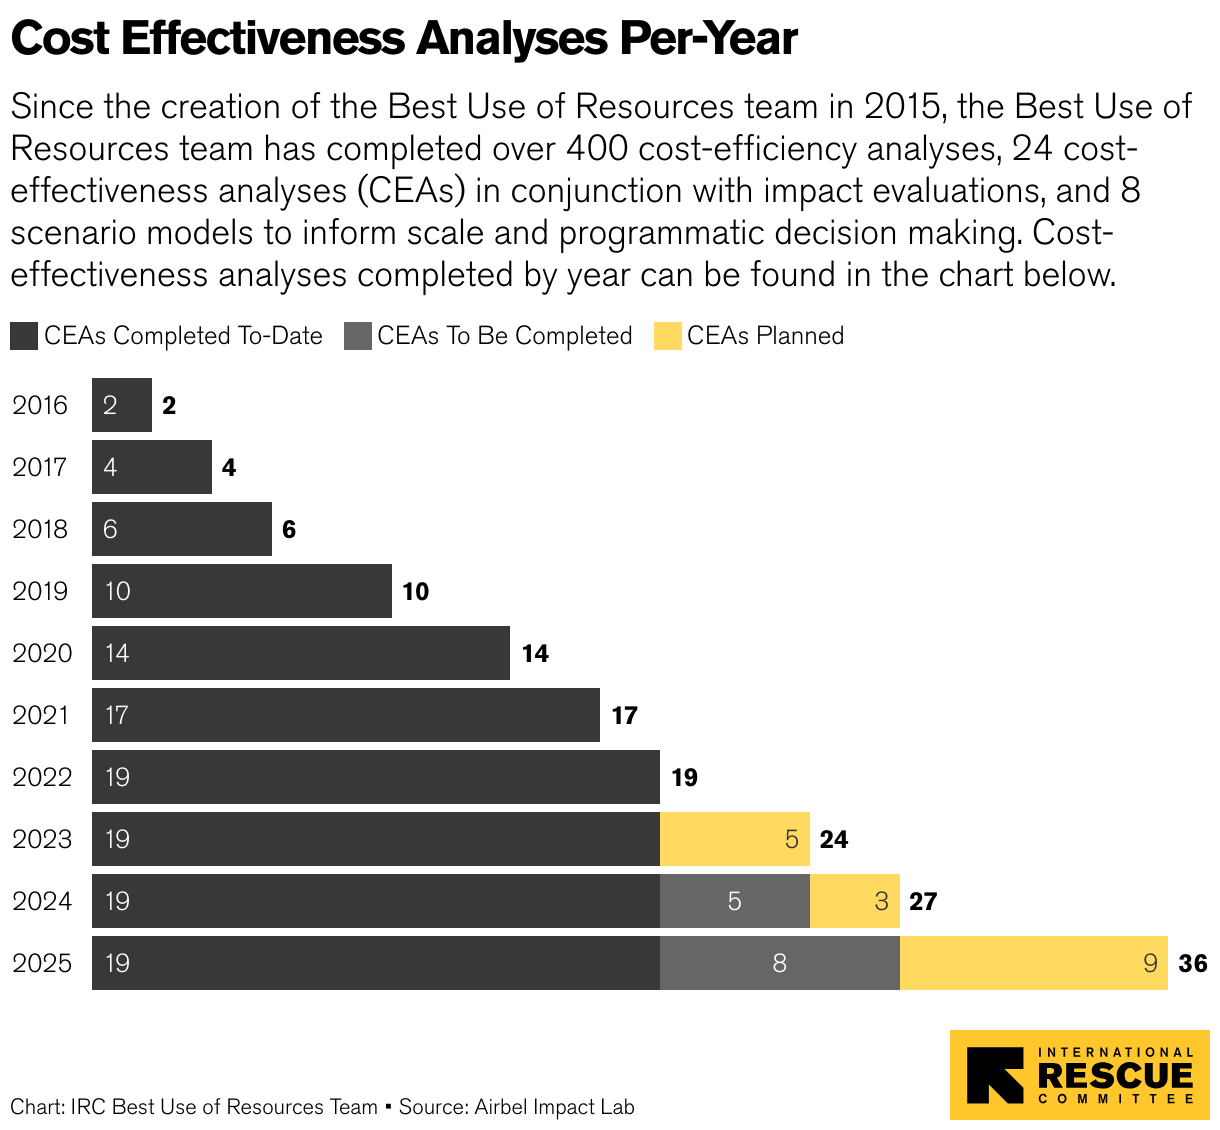 Since the creation of the Best Use of Resources team in 2015, the Best Use of Resources team has completed over 400 cost-efficiency analyses, 24 cost-effectiveness analyses (CEAs) in conjunction with impact evaluations, and 8 scenario models to inform scale and programmatic decision making. 36 are planned to be completed by 2026.